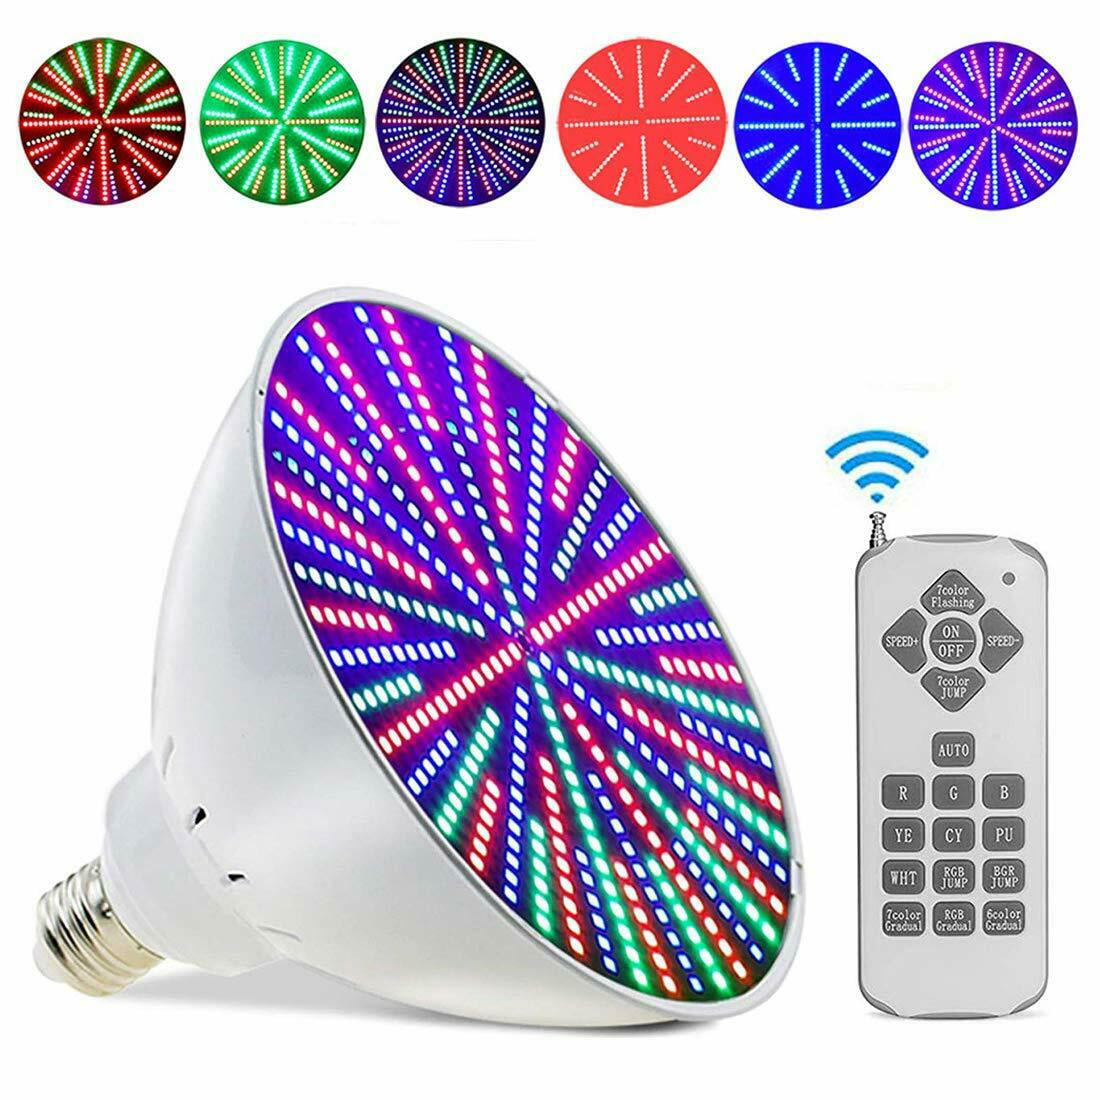 Remote Control kit not Included Pool Bulb Only LAMPAOUS Remote LED Pool Lights Bulb 120VAC 35 Watt Multi Color E26 Screw inground Pool Bulb for Pentair